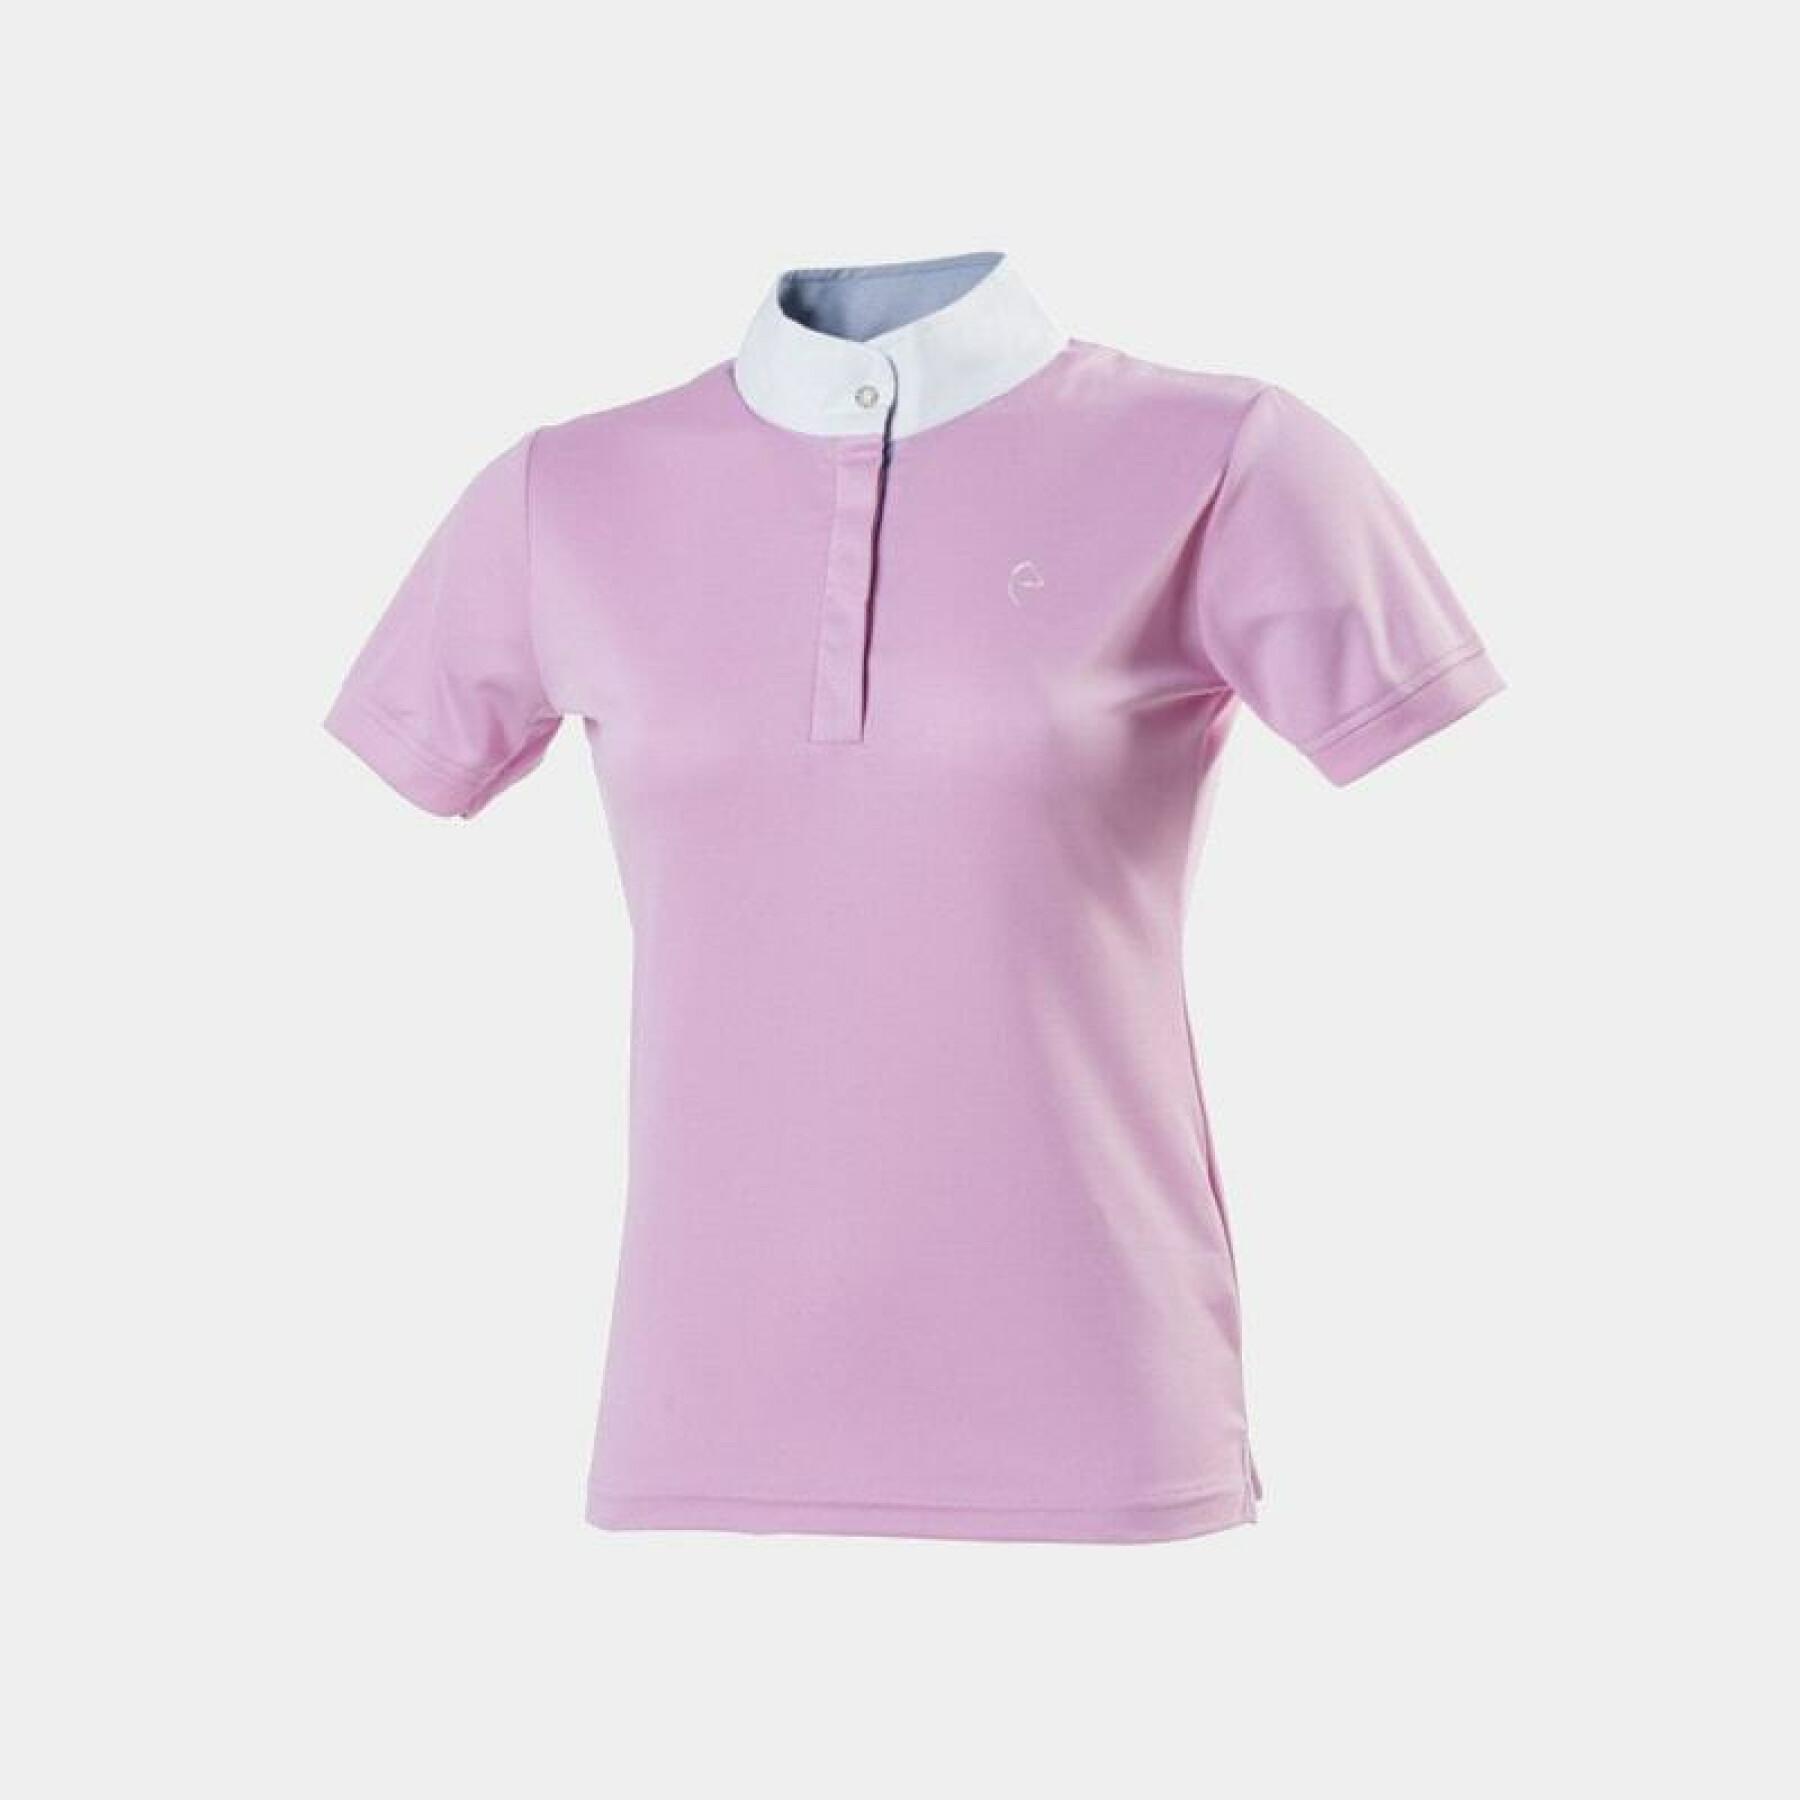 Women's knitted riding polo shirt Equithème